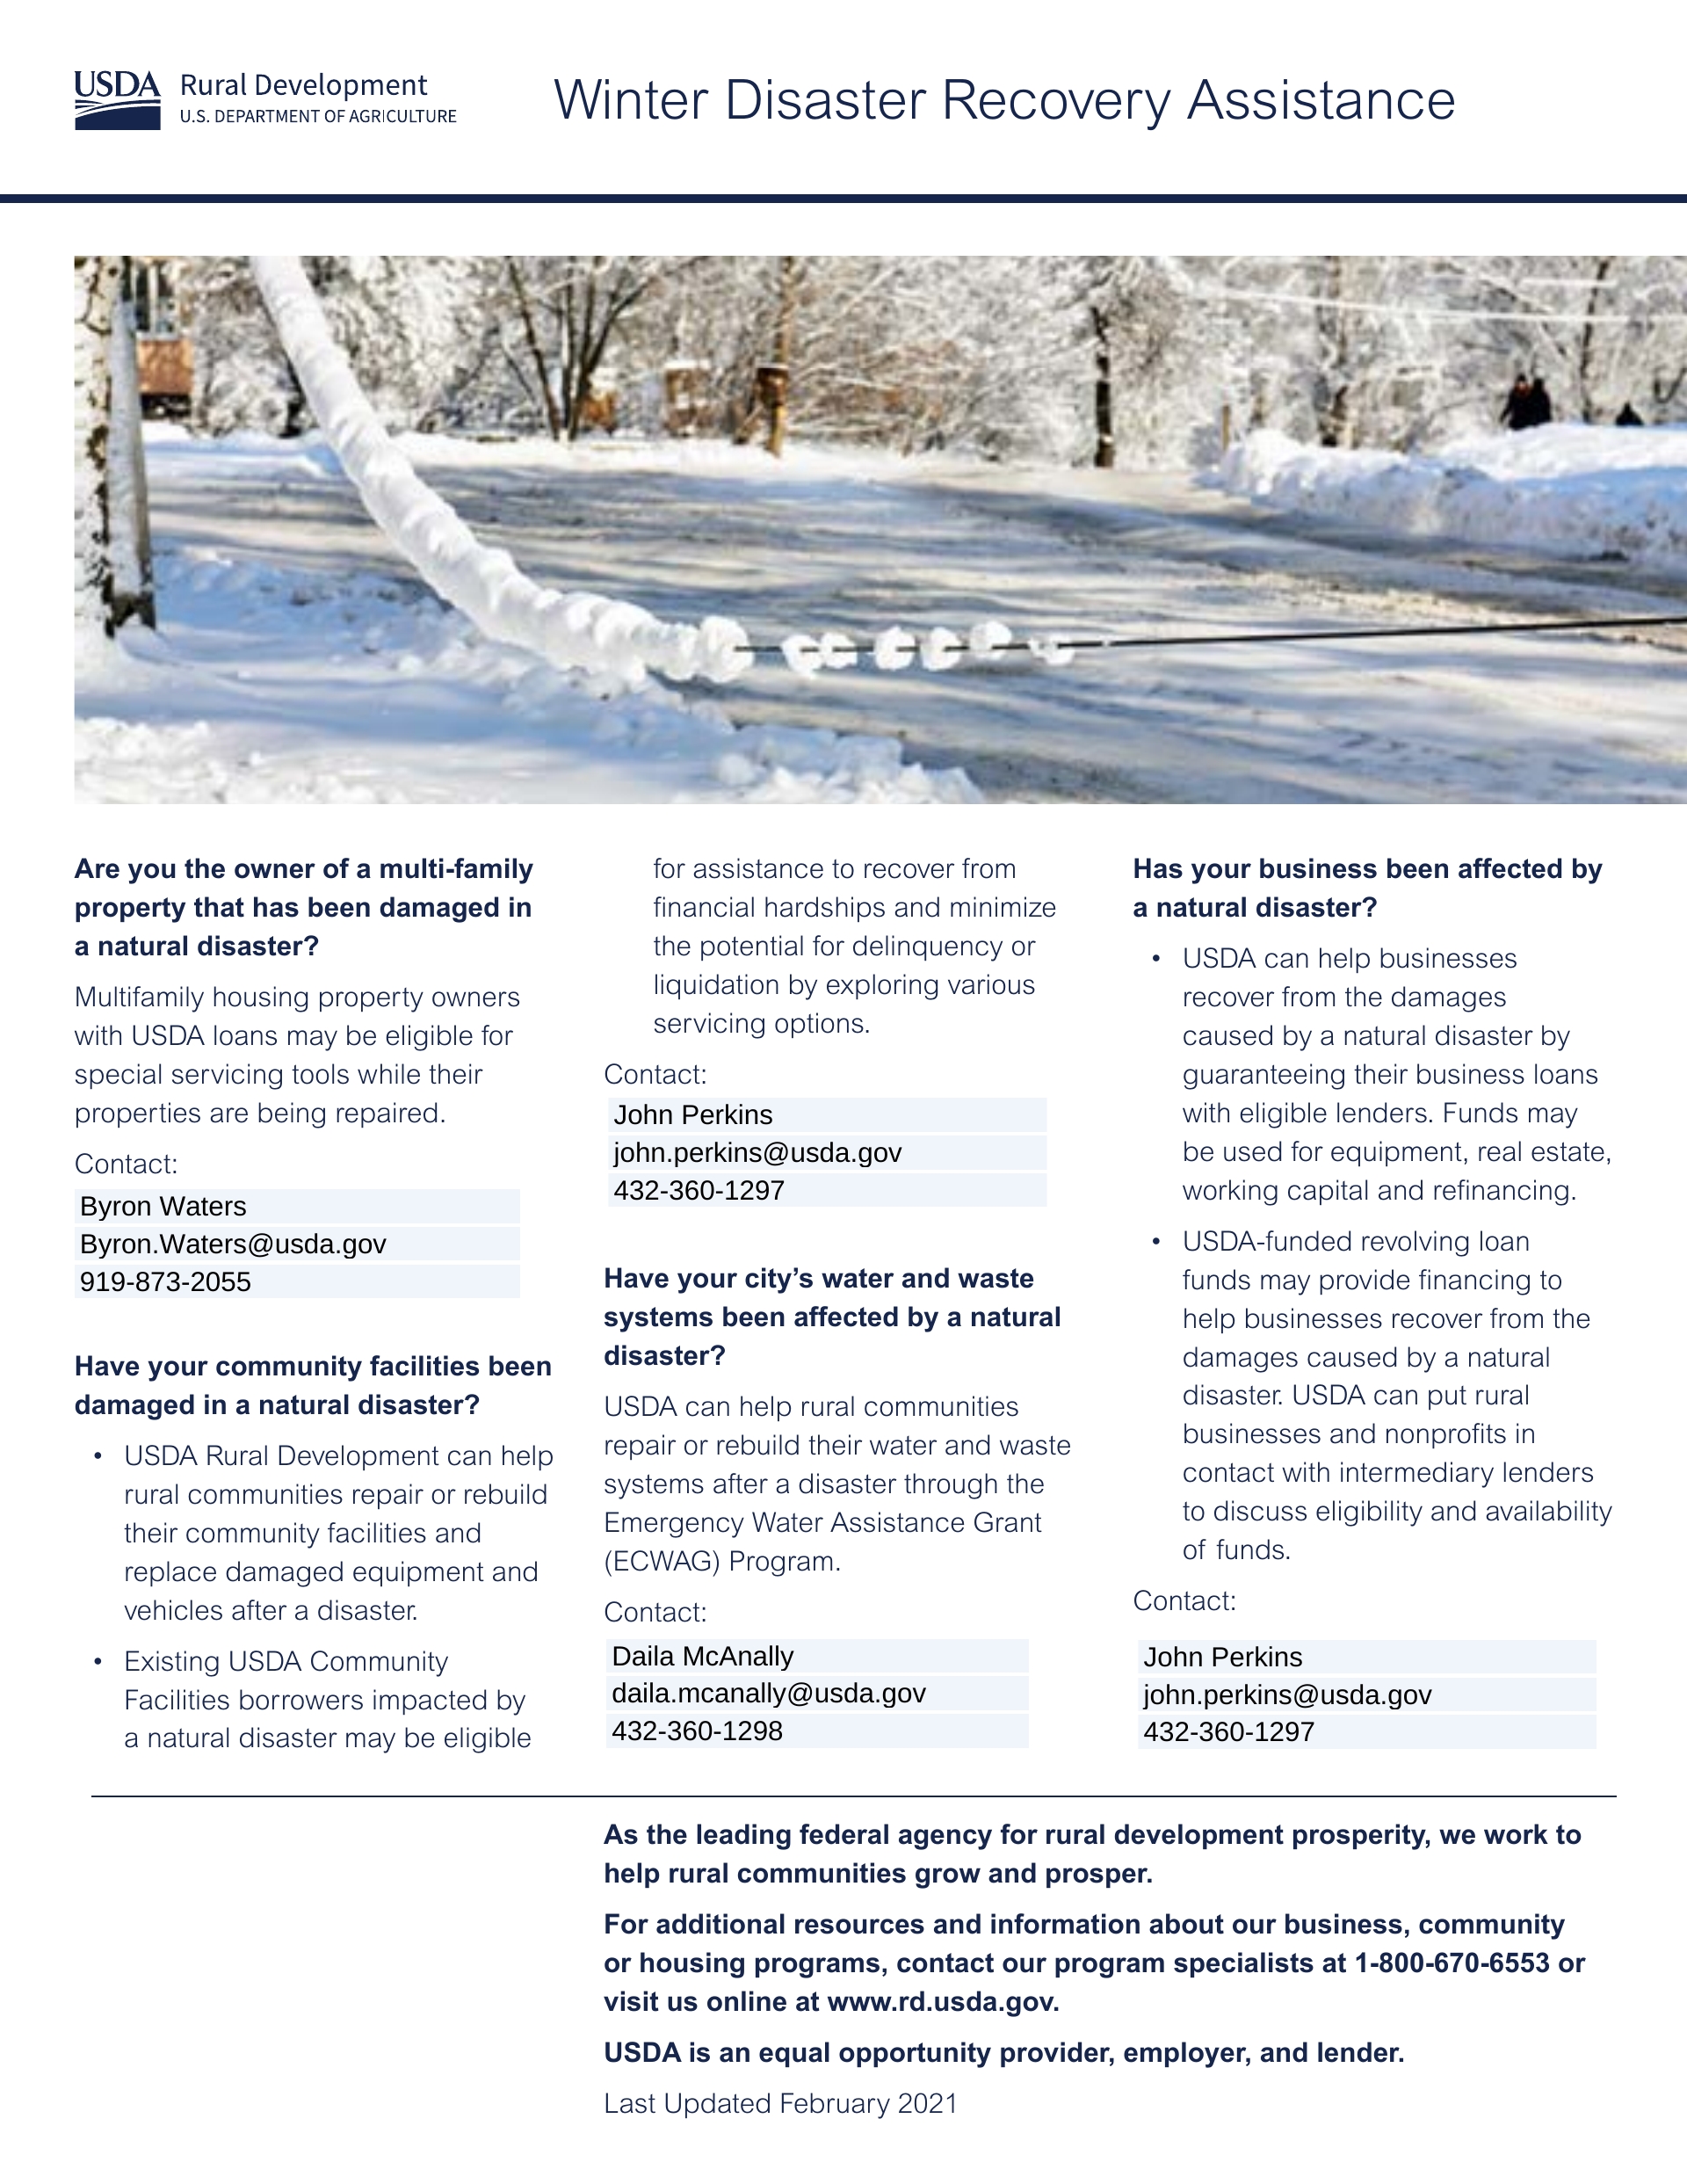 Winter Disaster Recovery Fact Sheet 2.0